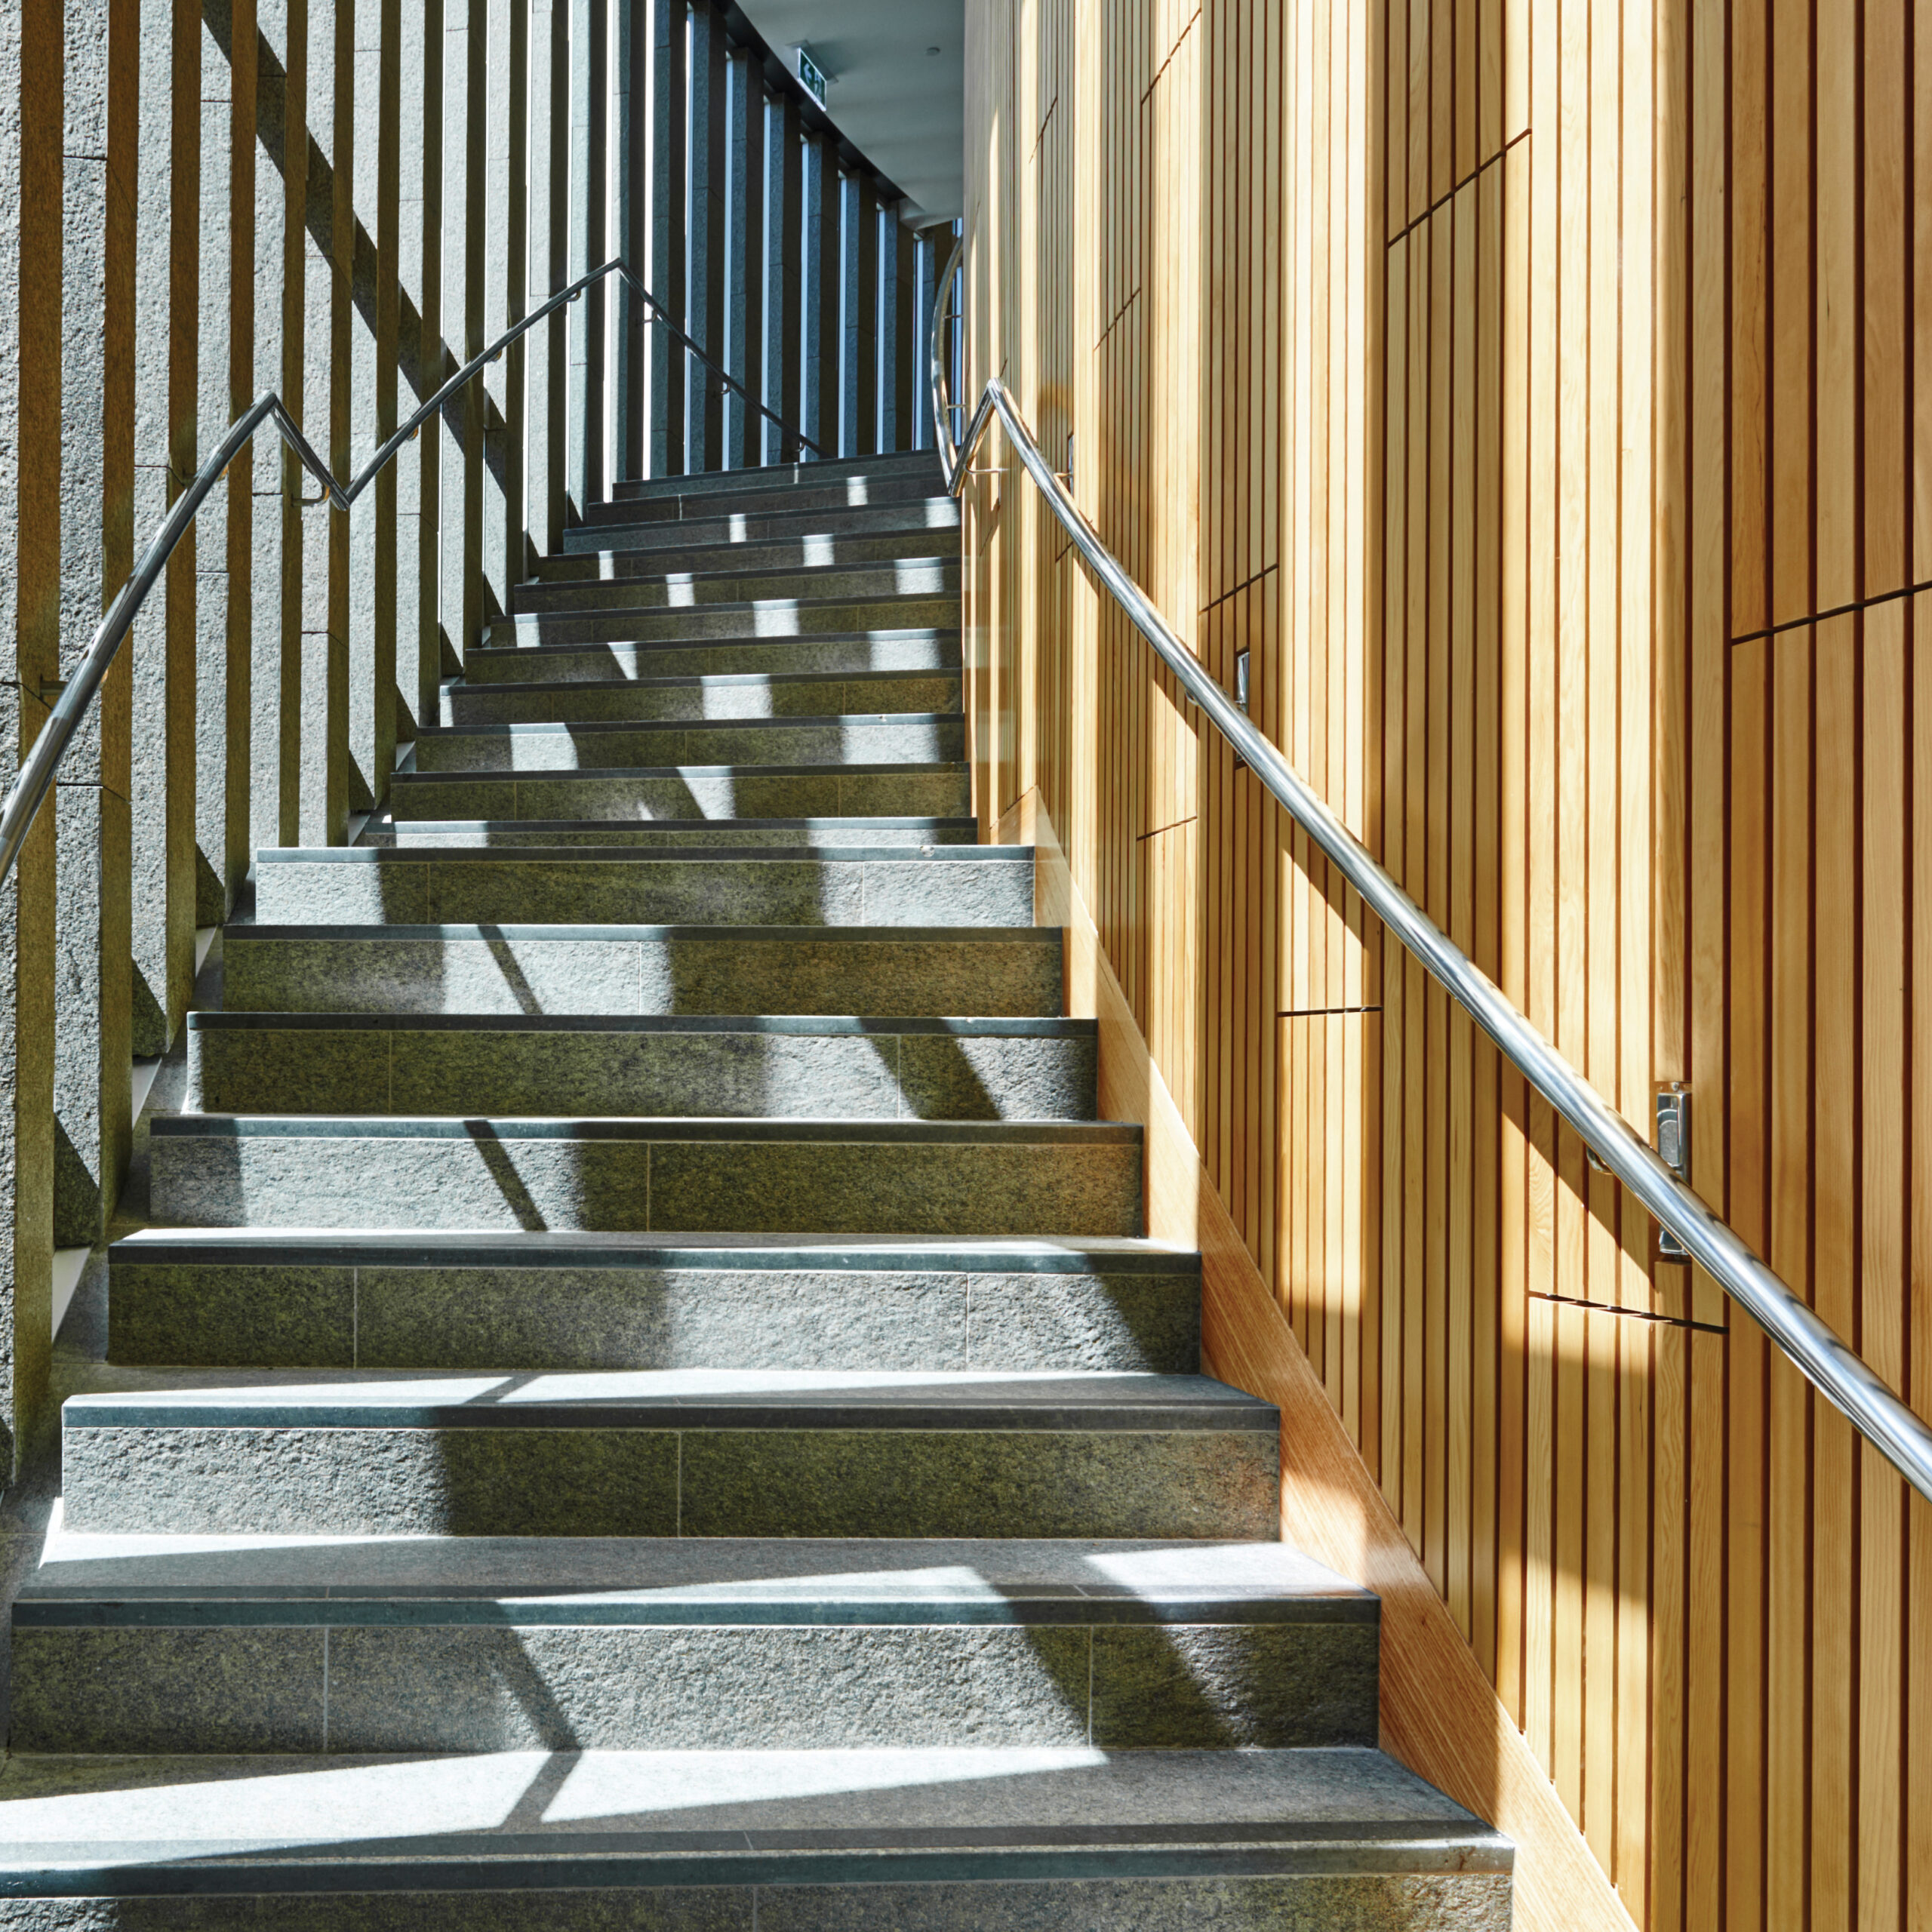 sound absorbing Timber panel in stairwell